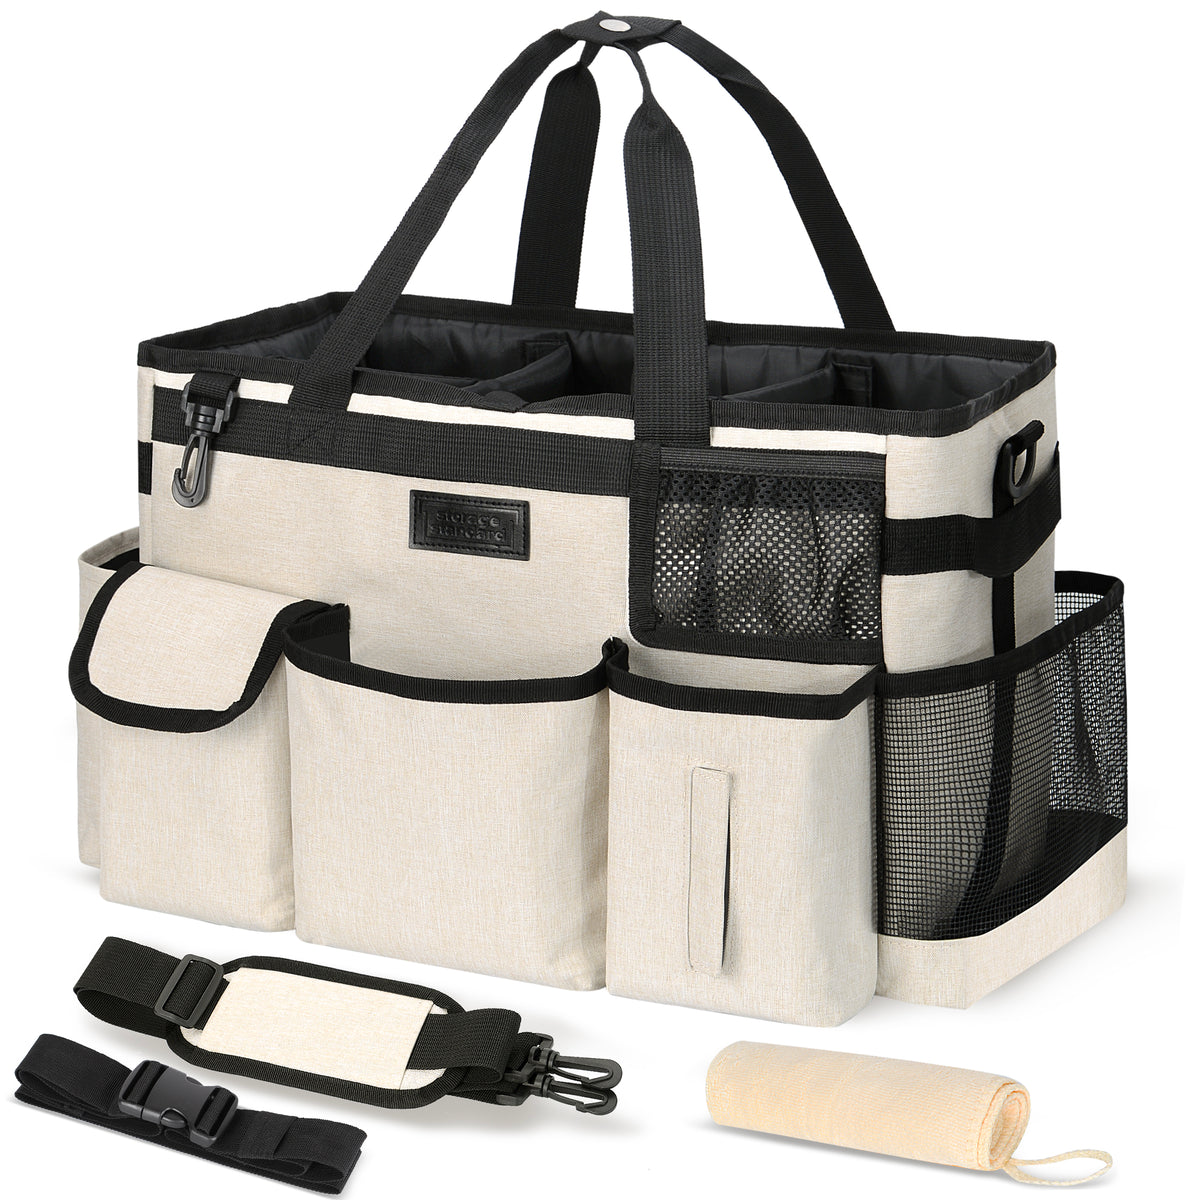 Wearable Cleaning Caddy Bag with 4 Foldable Dividers Cleaning